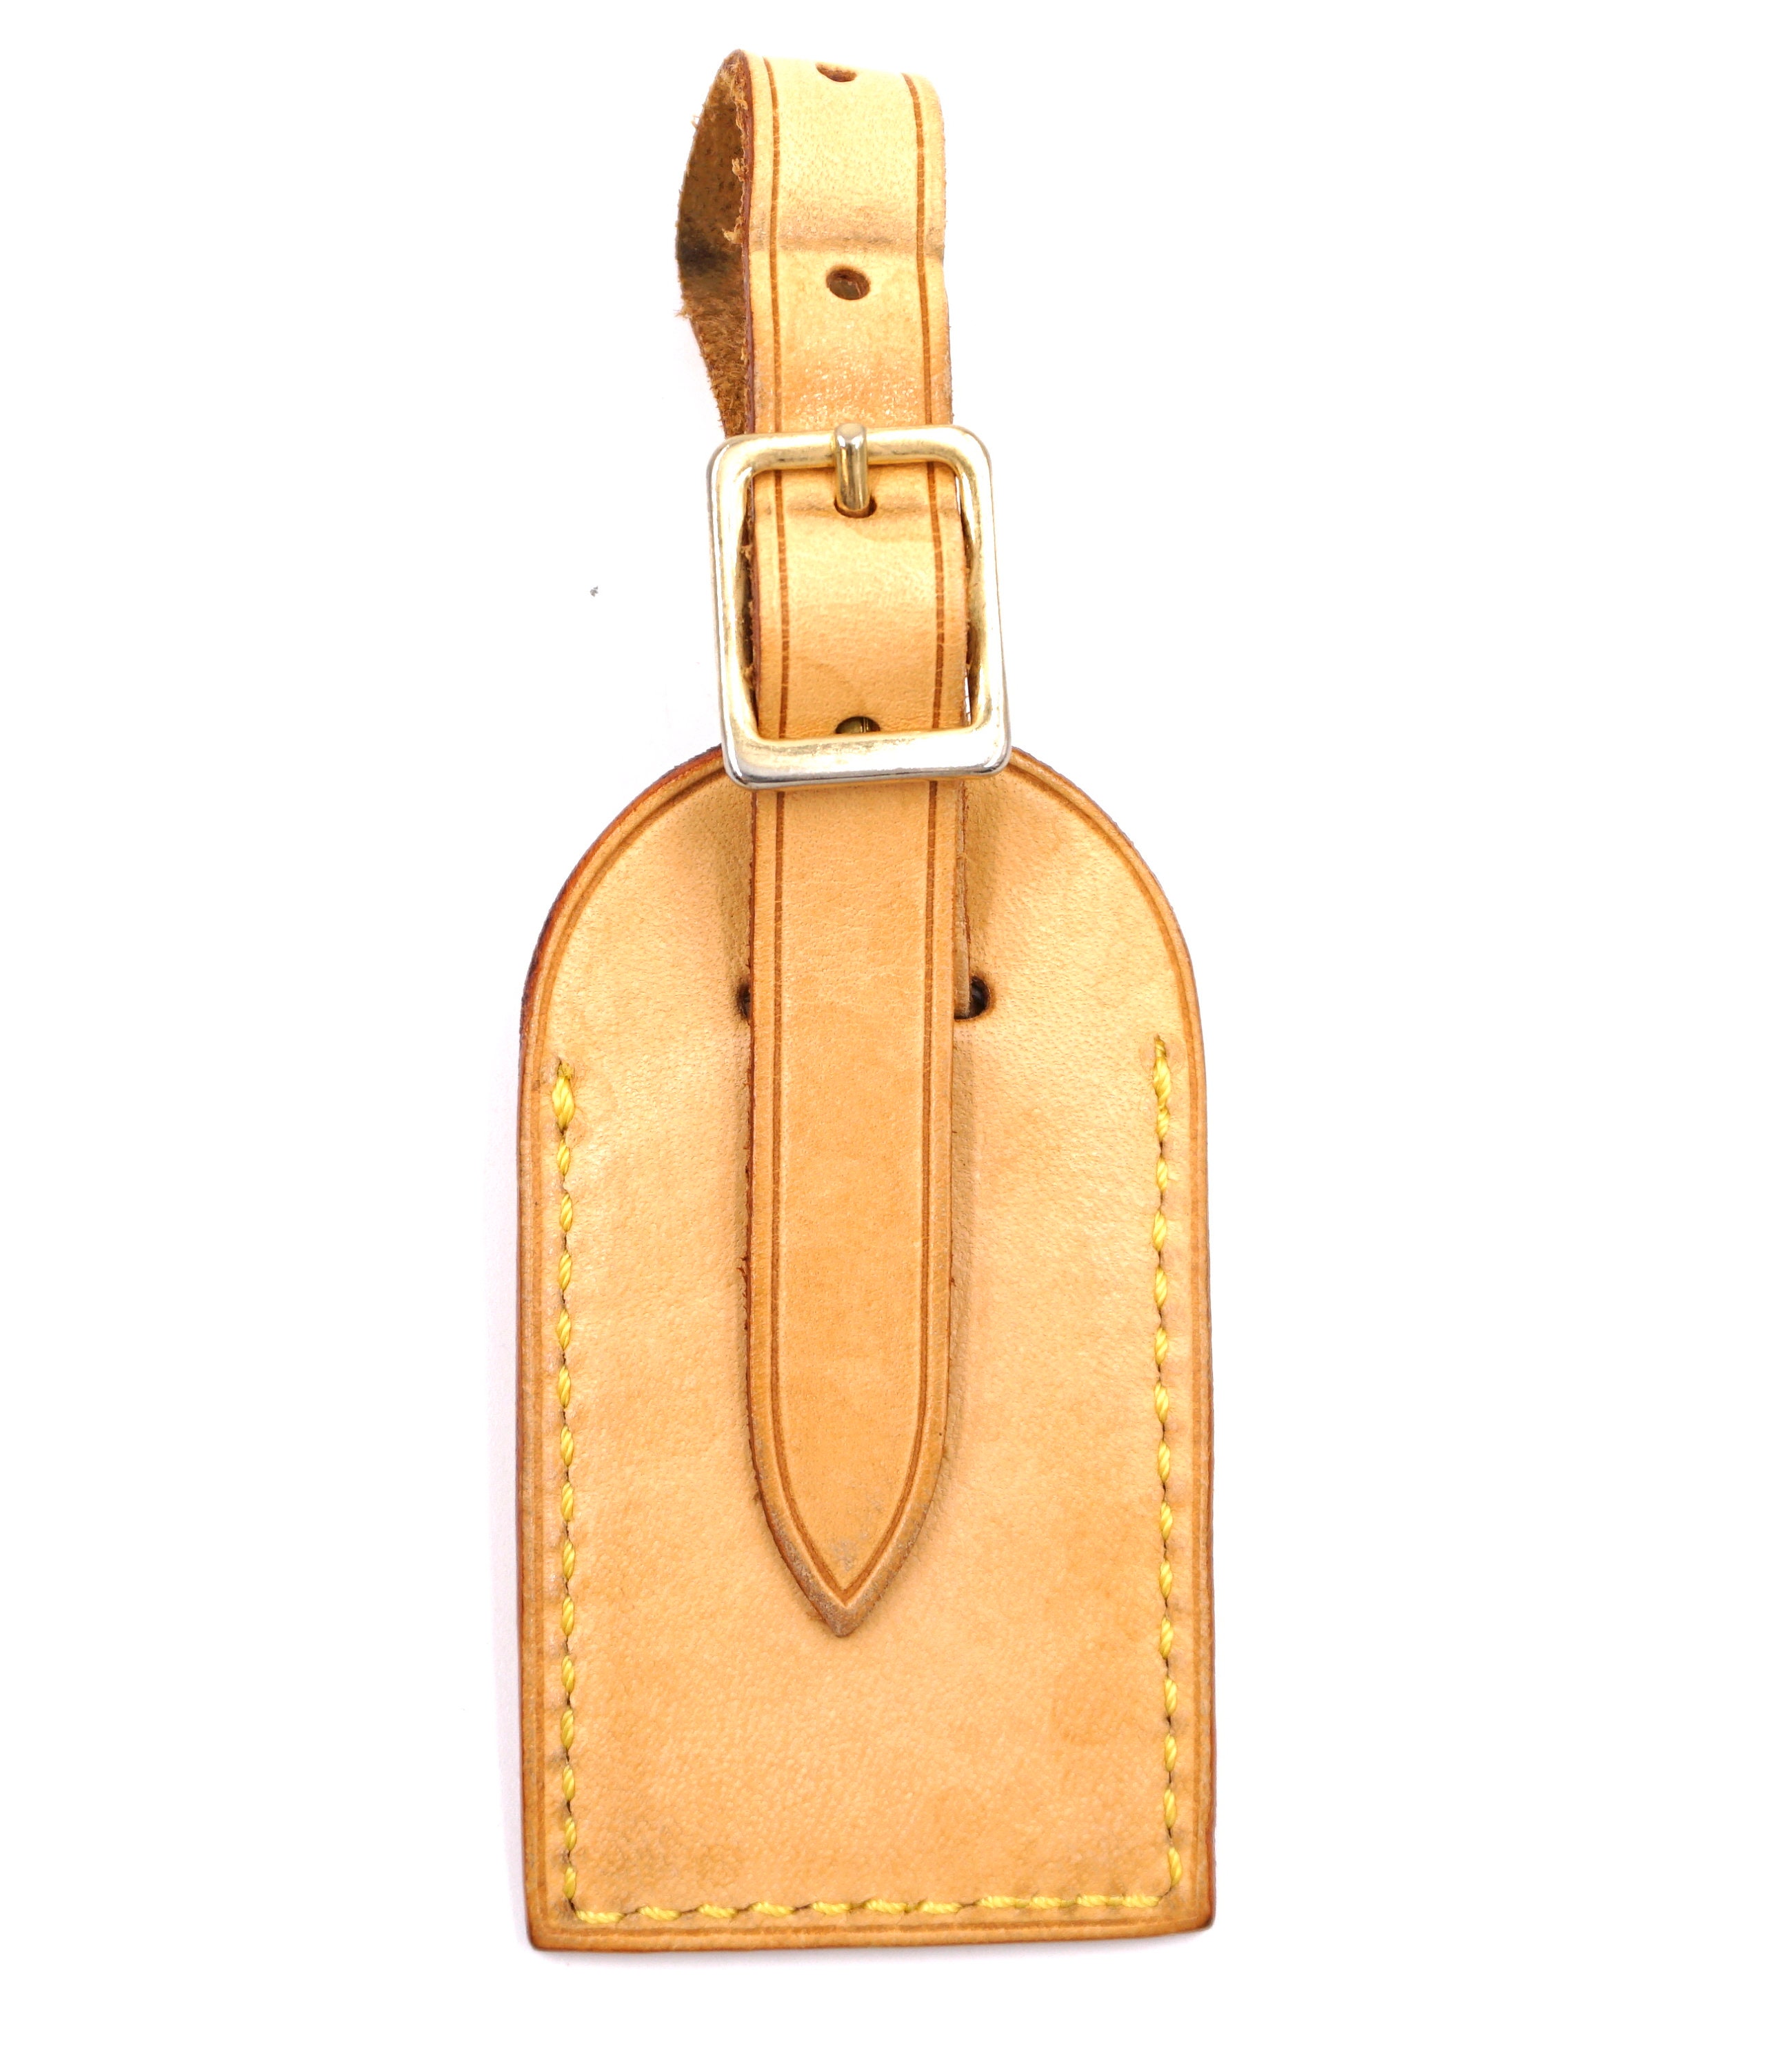 This can also be used to put your luggage tags on your handbags 😄 Wha, LOUIS  VUITTON